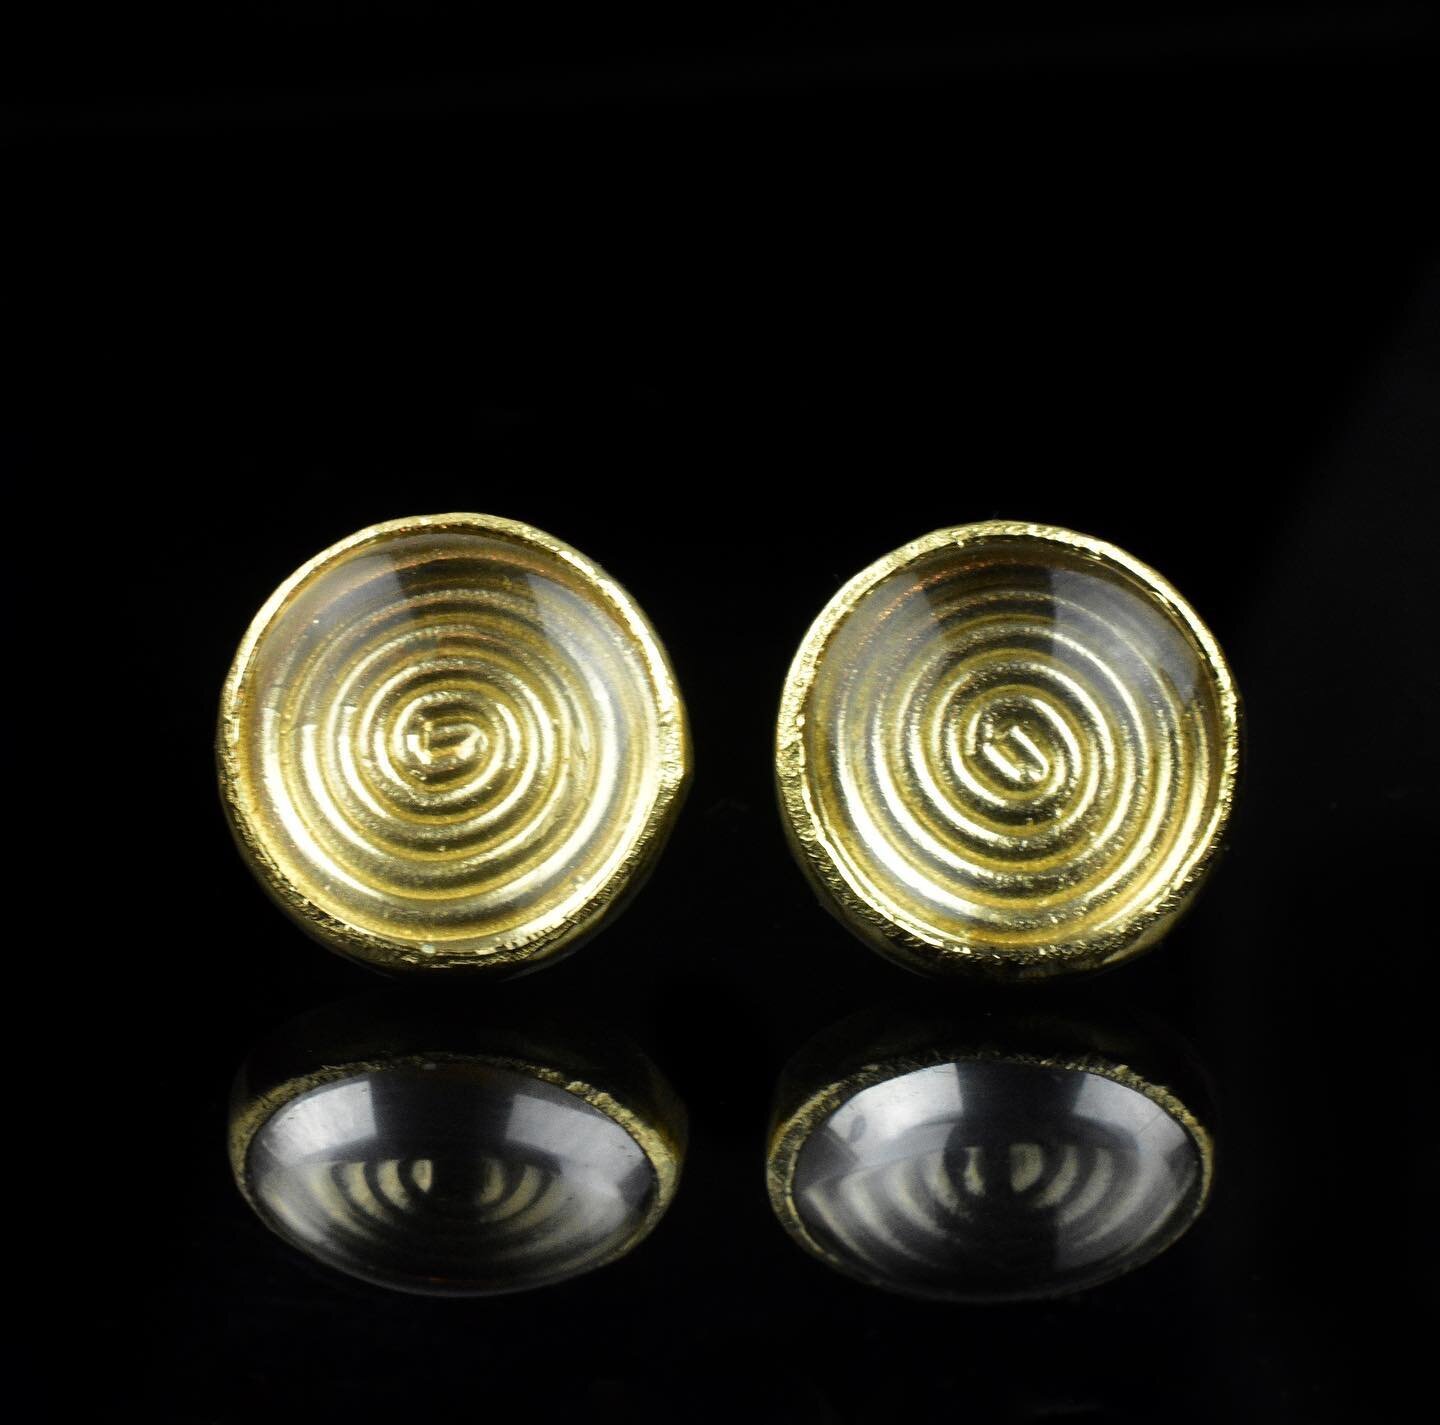 A real favourite of ours! 🌀

Shield earrings with ancient yellow gold spirals under a Rock crystal cabochon. These catch the light so beautifully and are so easy to wear! 

Available on our website and @craftnigallery